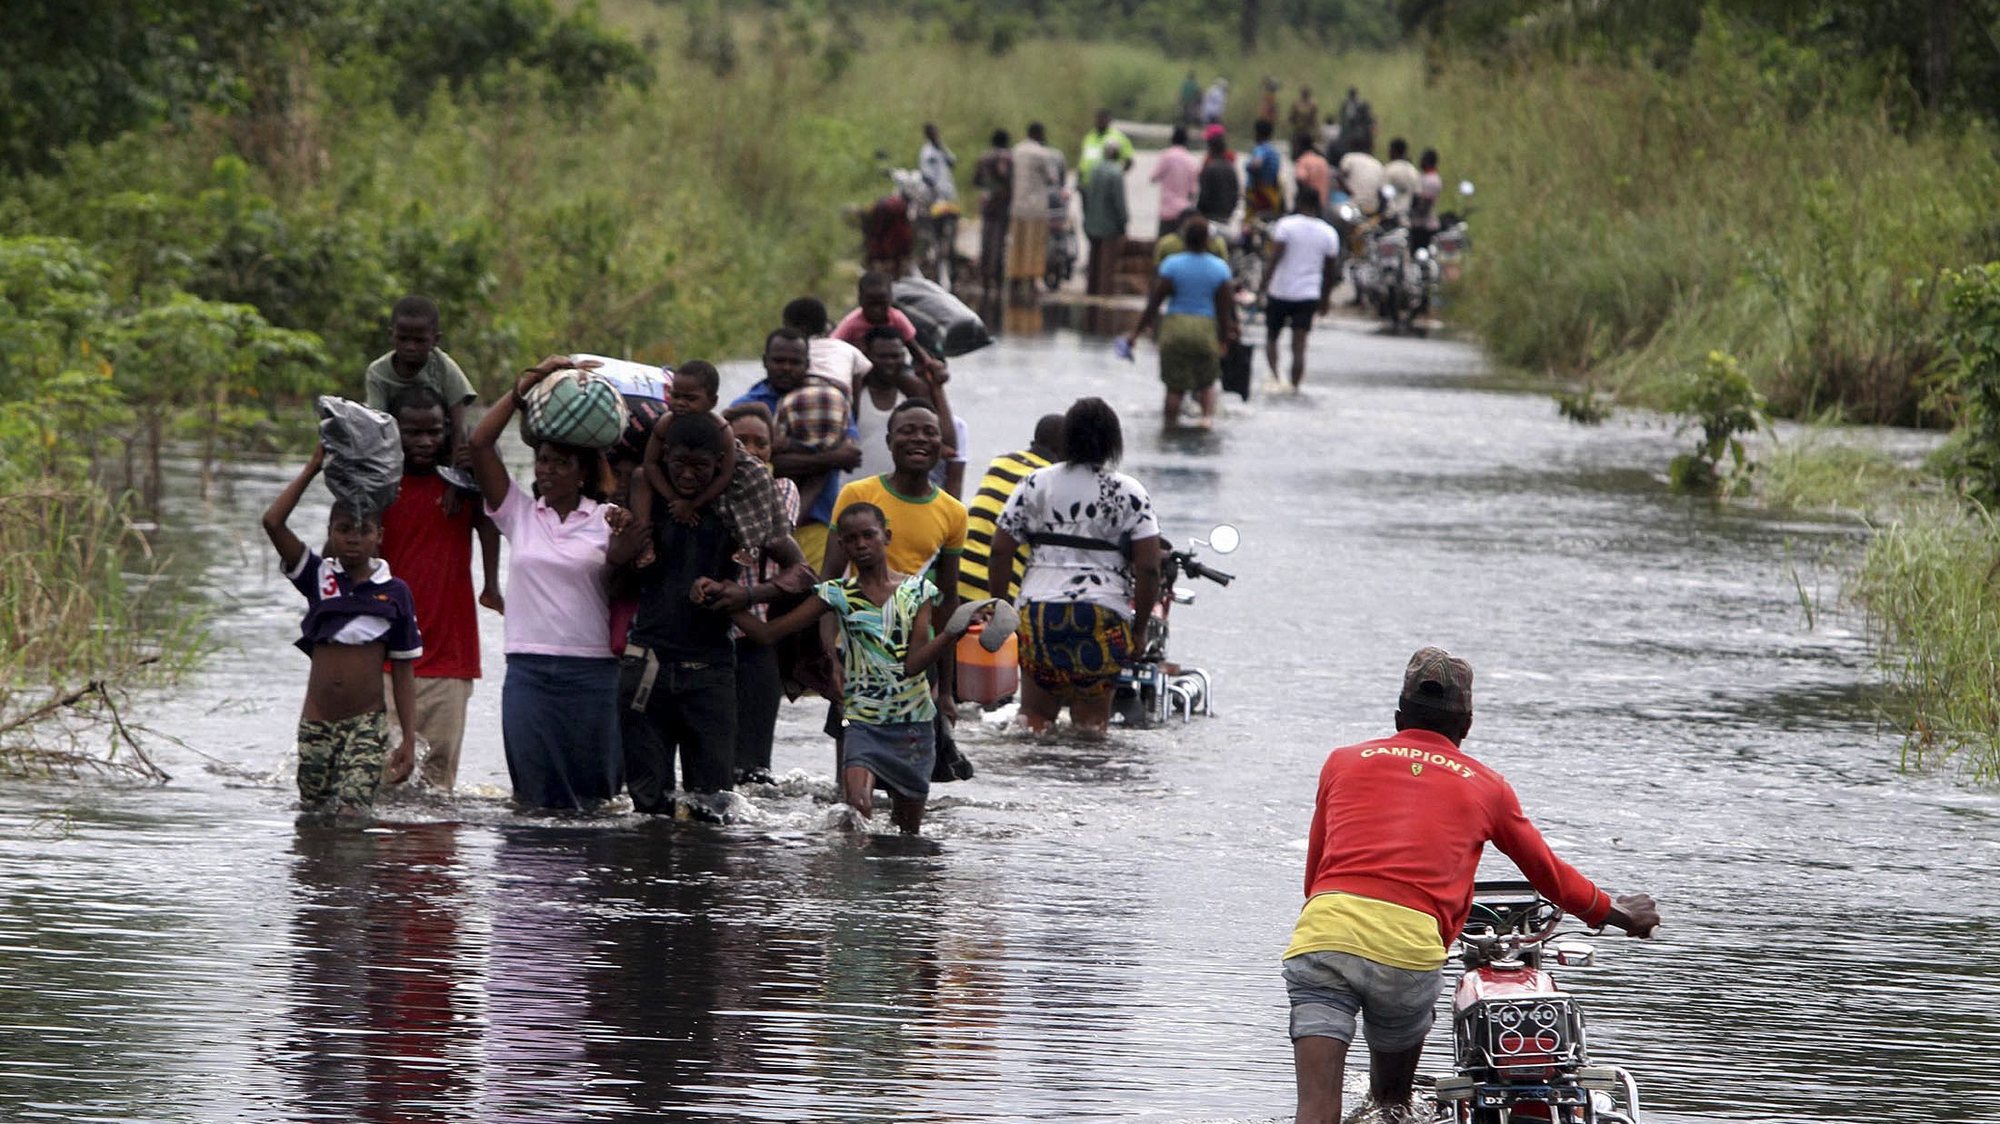 epa03429135 Nigerians move along a flooded road in Okpe, Isoko north local goverment council Niger delta, Nigeria, 11 October 2012. Heavy rains over over the past weeks have caused devastating floods which have submerged most communities in the oil rich Niger delta region of Nigeria.  EPA/GEORGE ESIRI